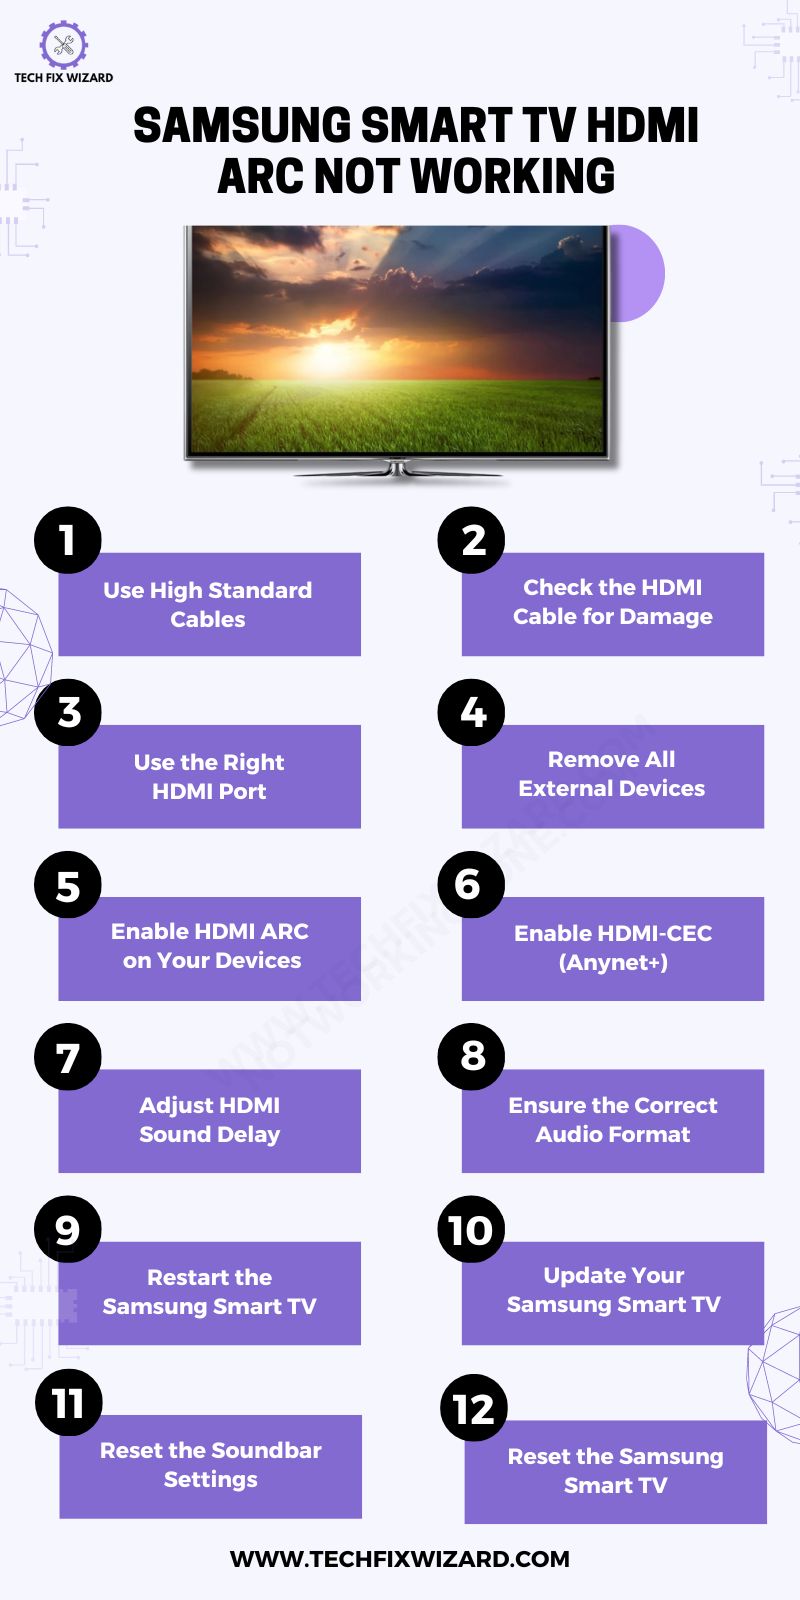 Samsung Smart TV HDMI ARC Not Working-12 Solutions To Try Infographic